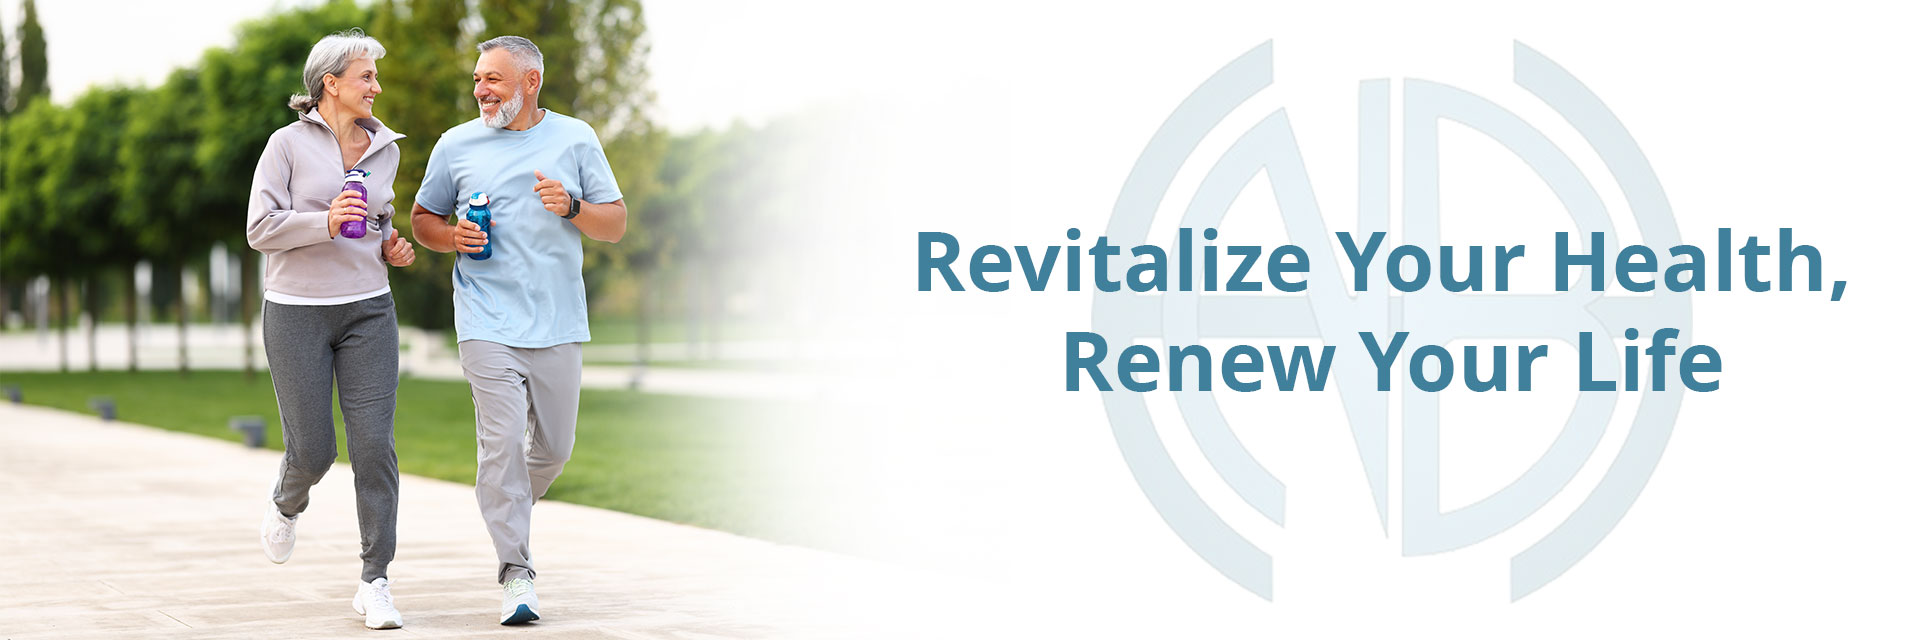 Revitalize Your Health, Renew Your Life